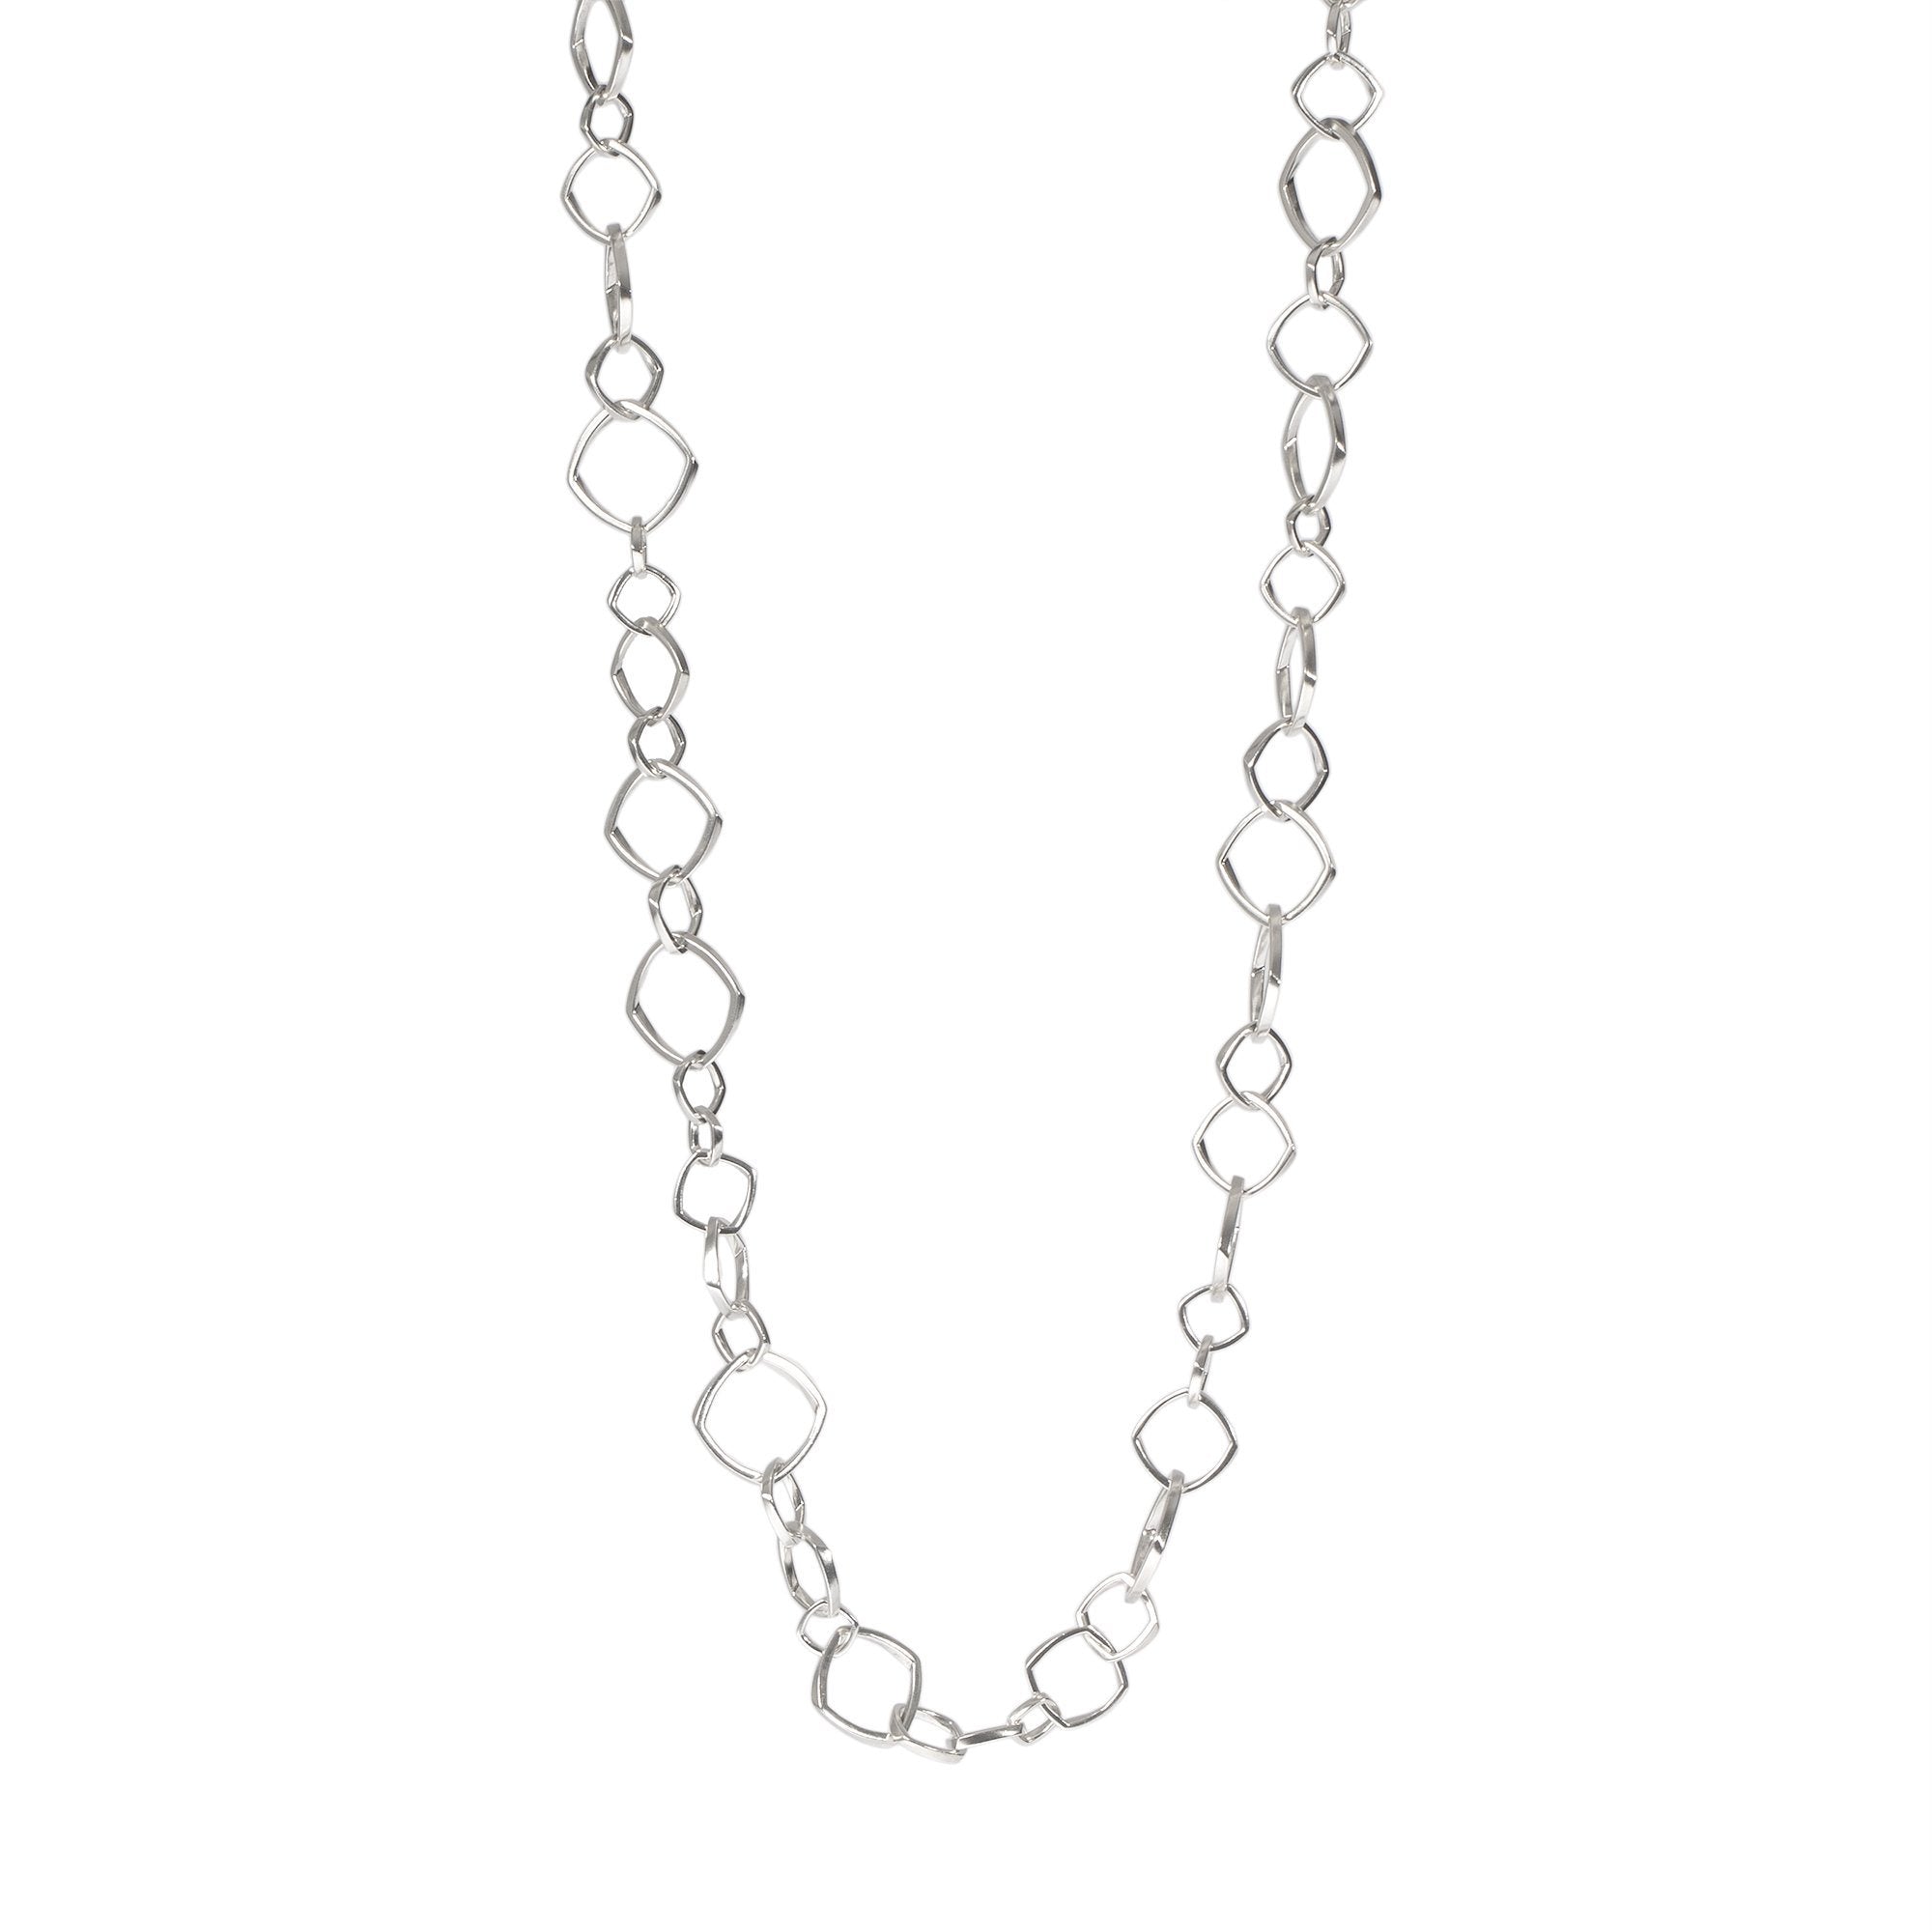 Tiffany & Co. Frank Gehry Torque Link Necklace– Oliver Jewellery